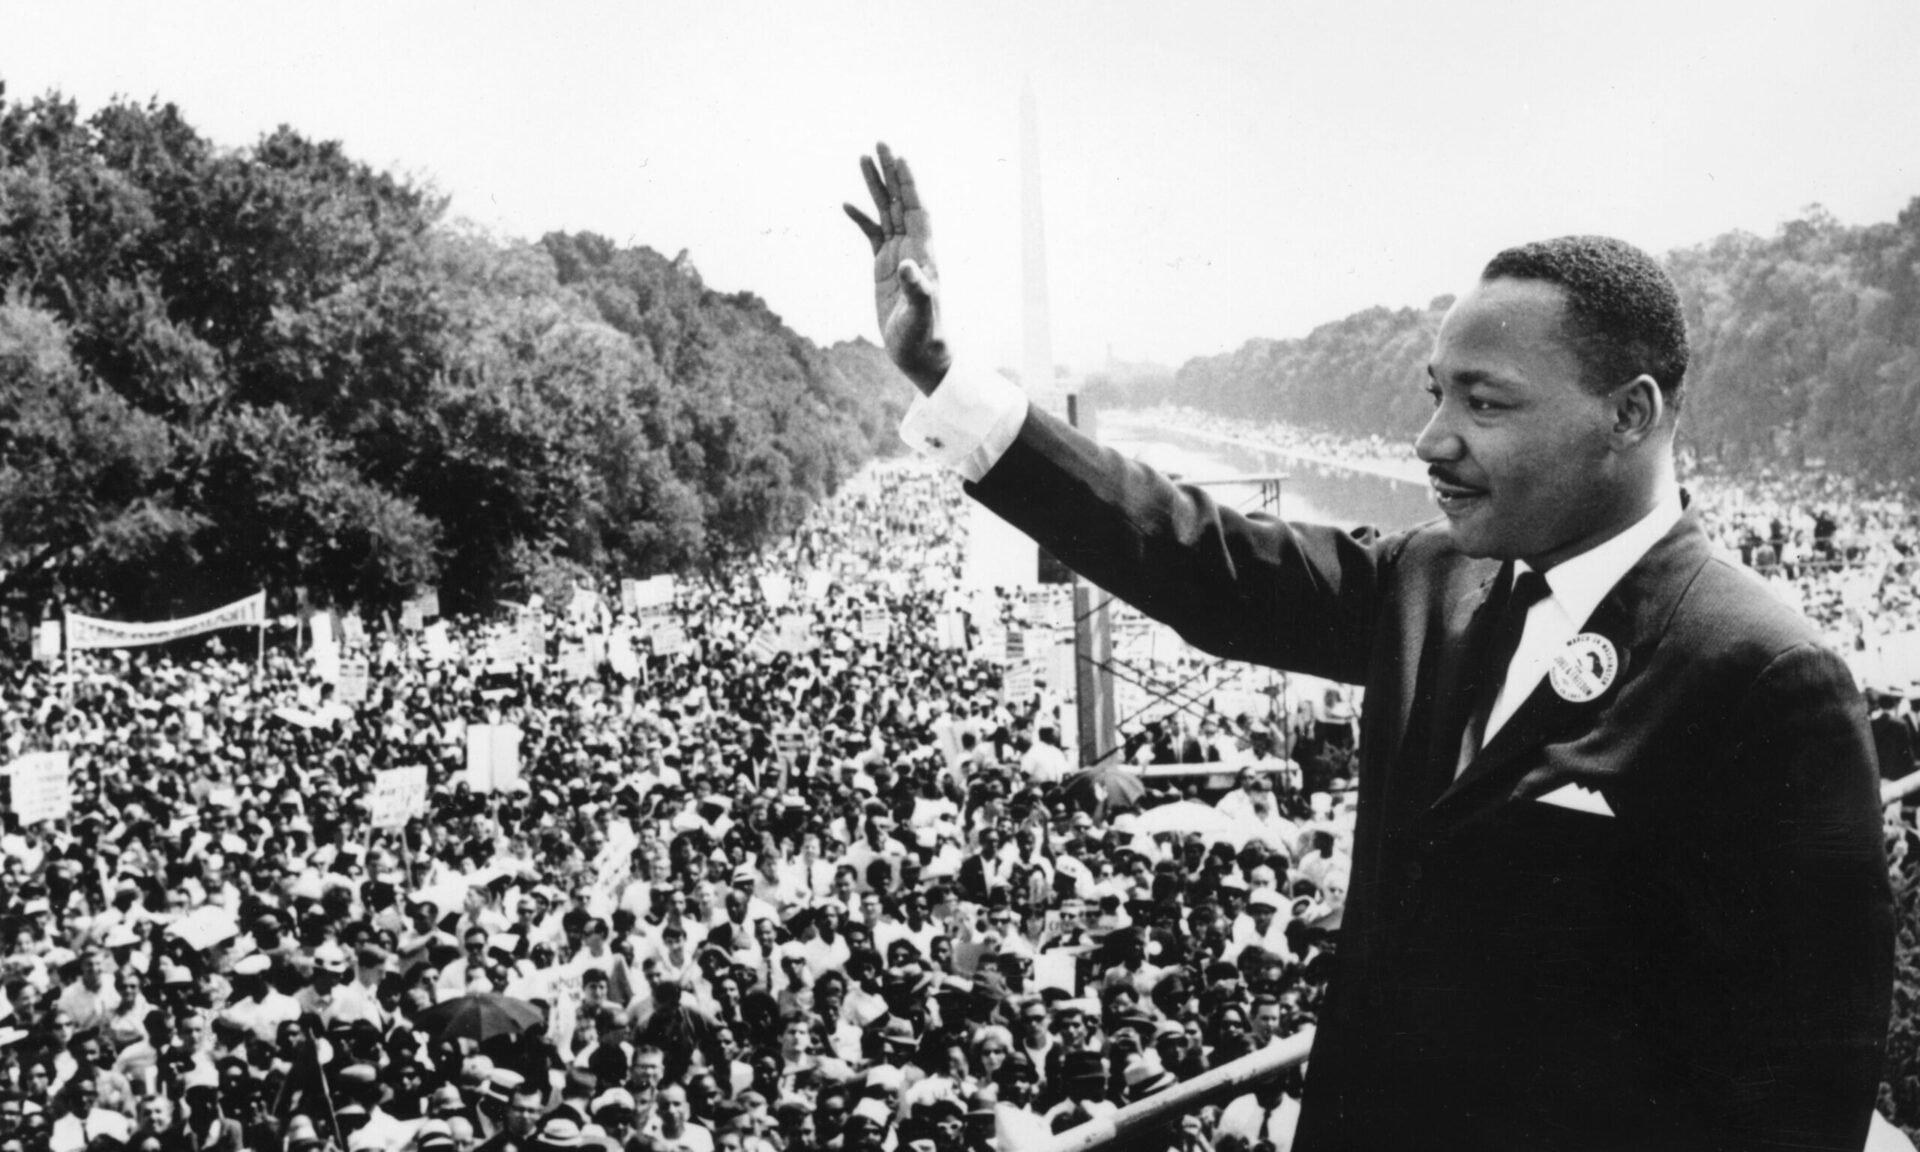 Martin-Luther-king-speech-to-his-community